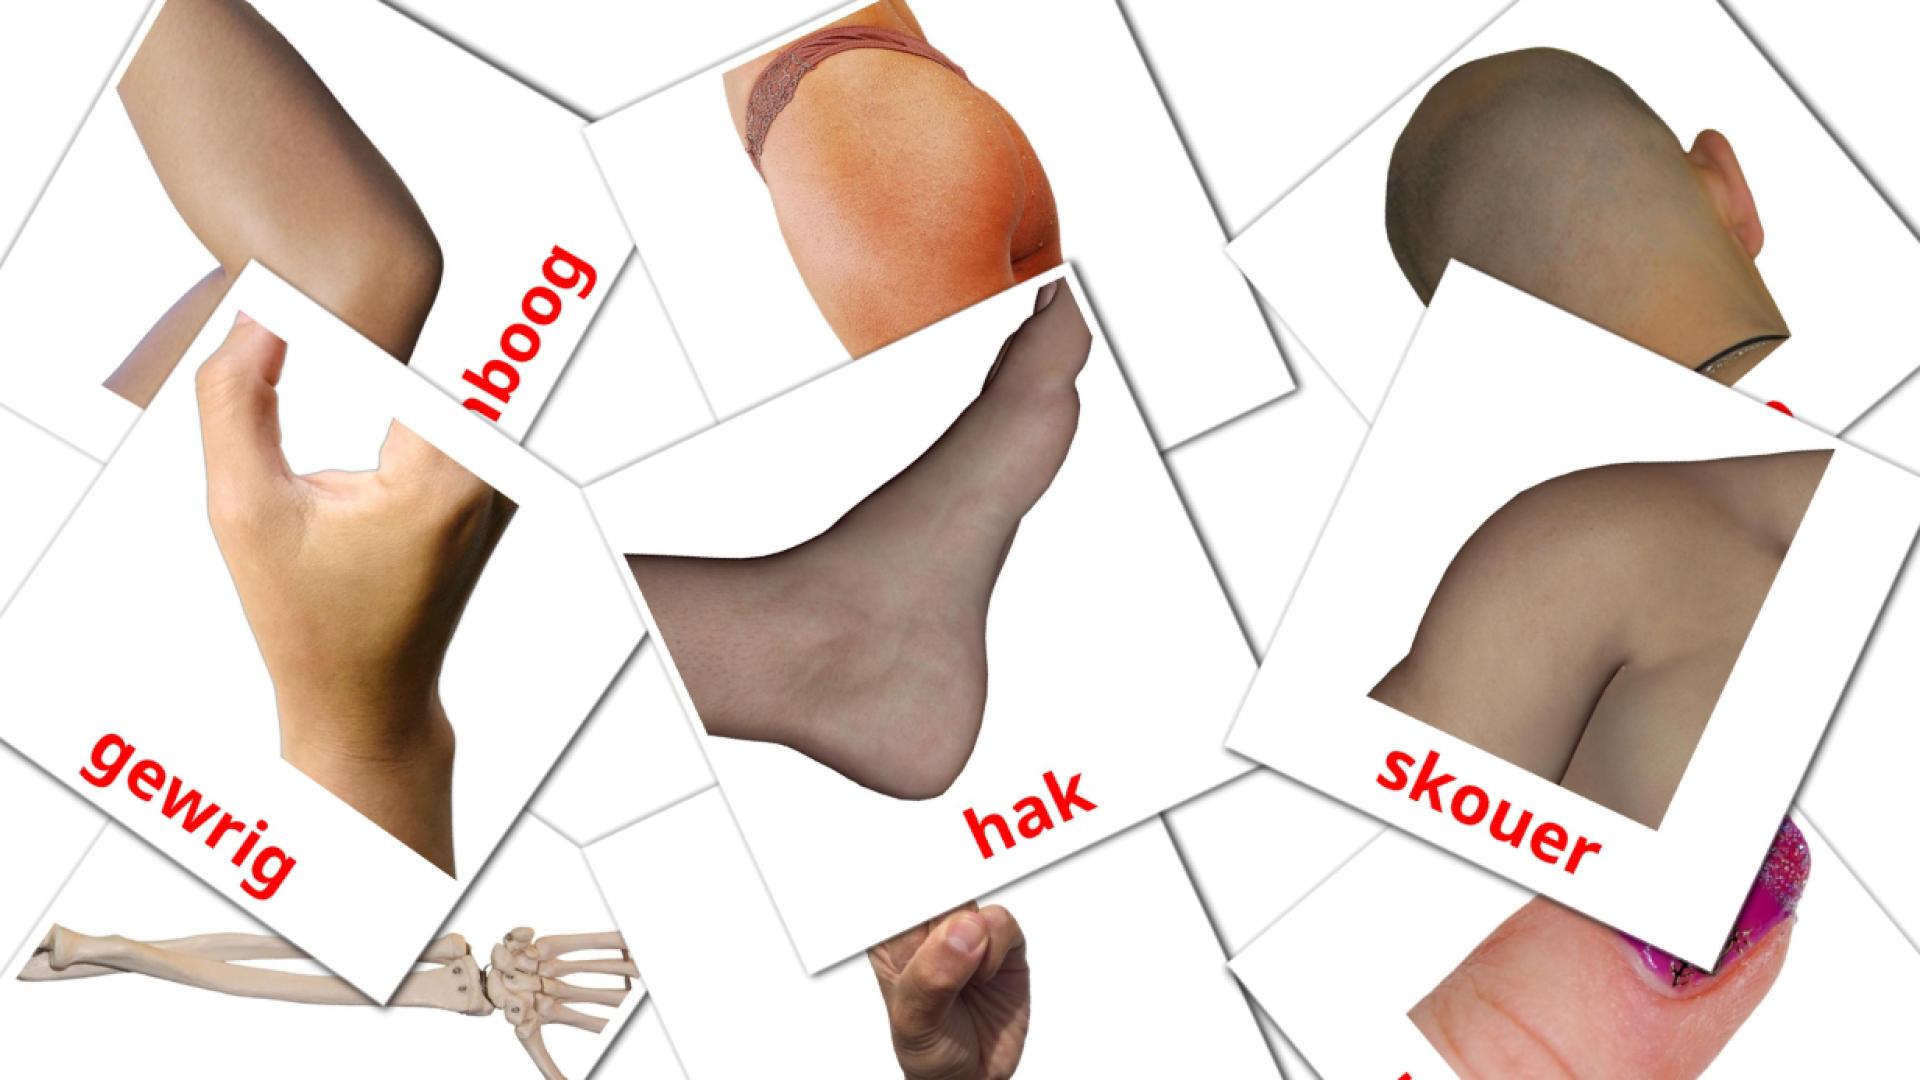 Body Parts - afrikaans vocabulary cards